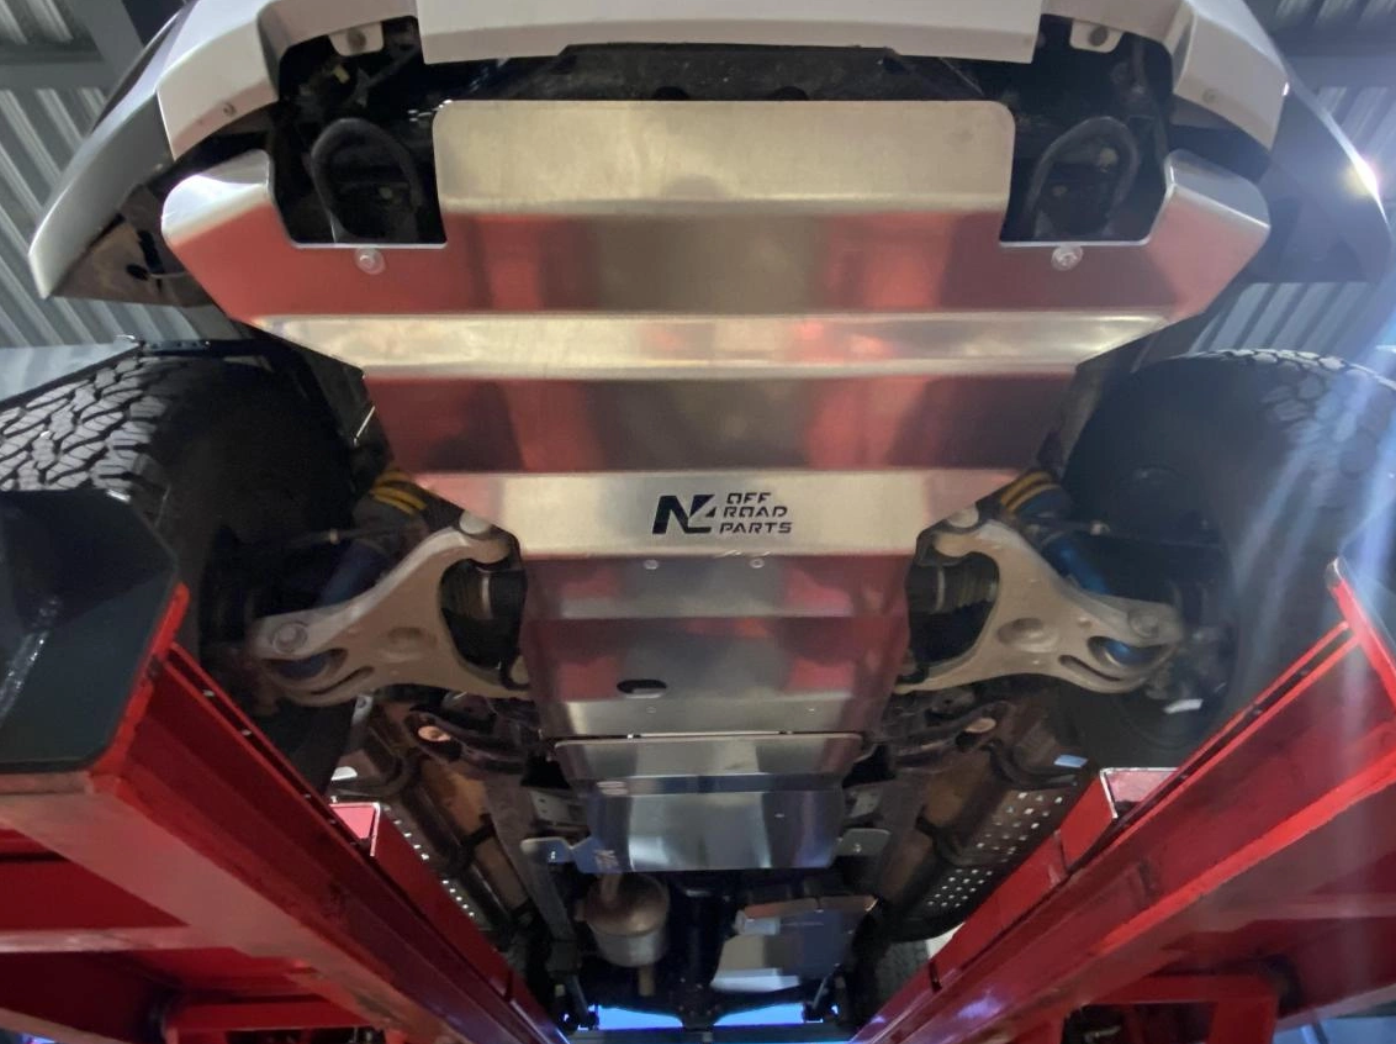 N4 protection mounted under an aluminum vehicle